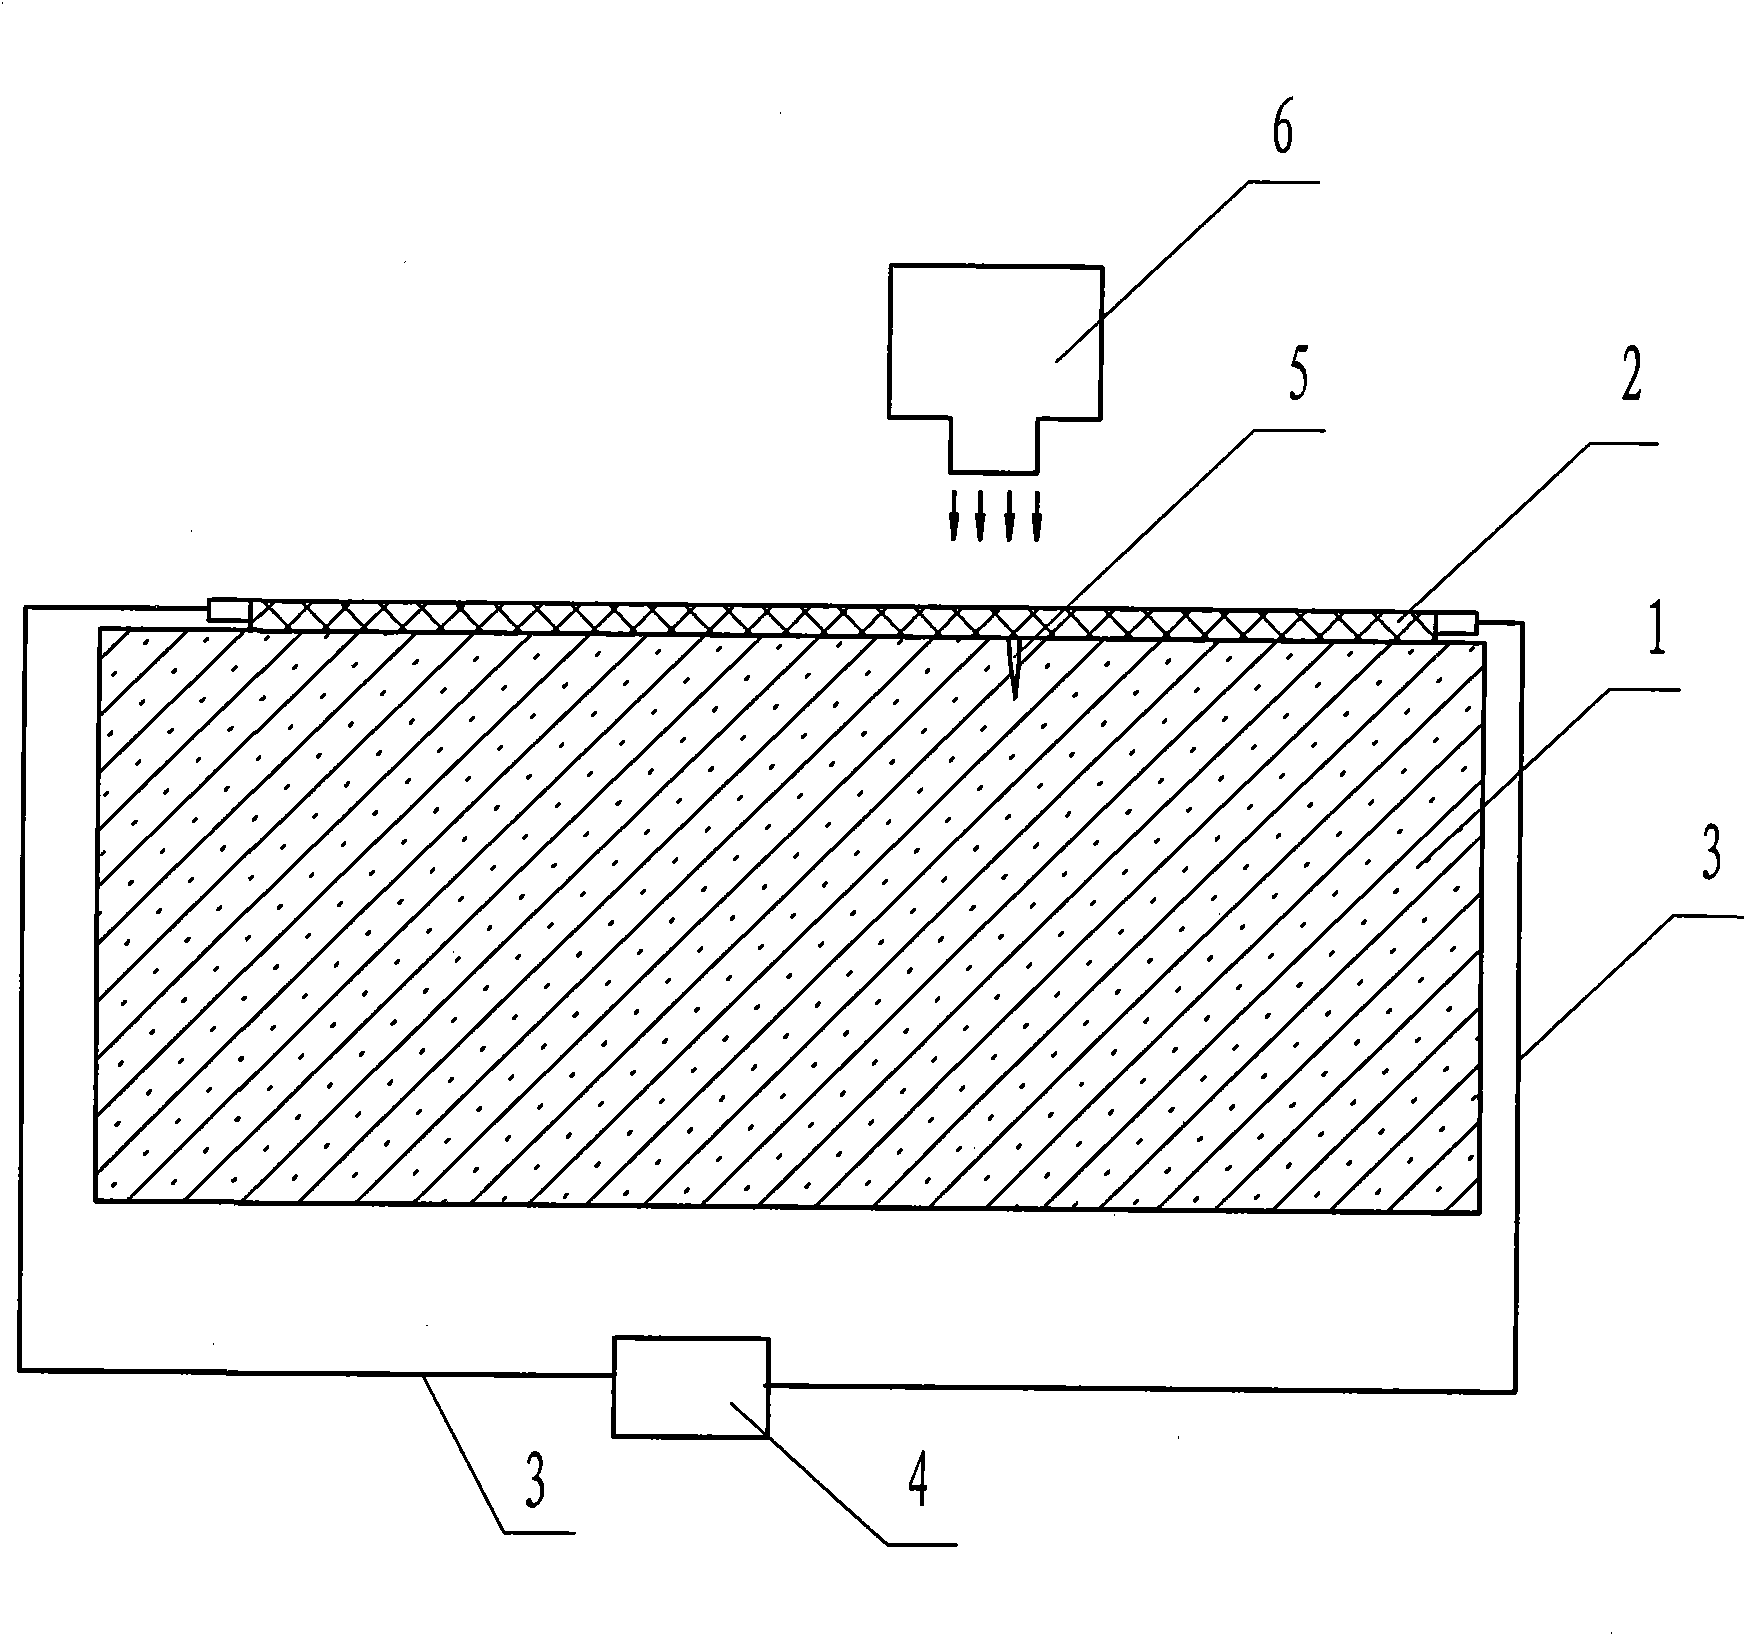 Method for monitoring and positioning concrete cracks by using elastic conducting film sensor and infrared thermal imaging technique